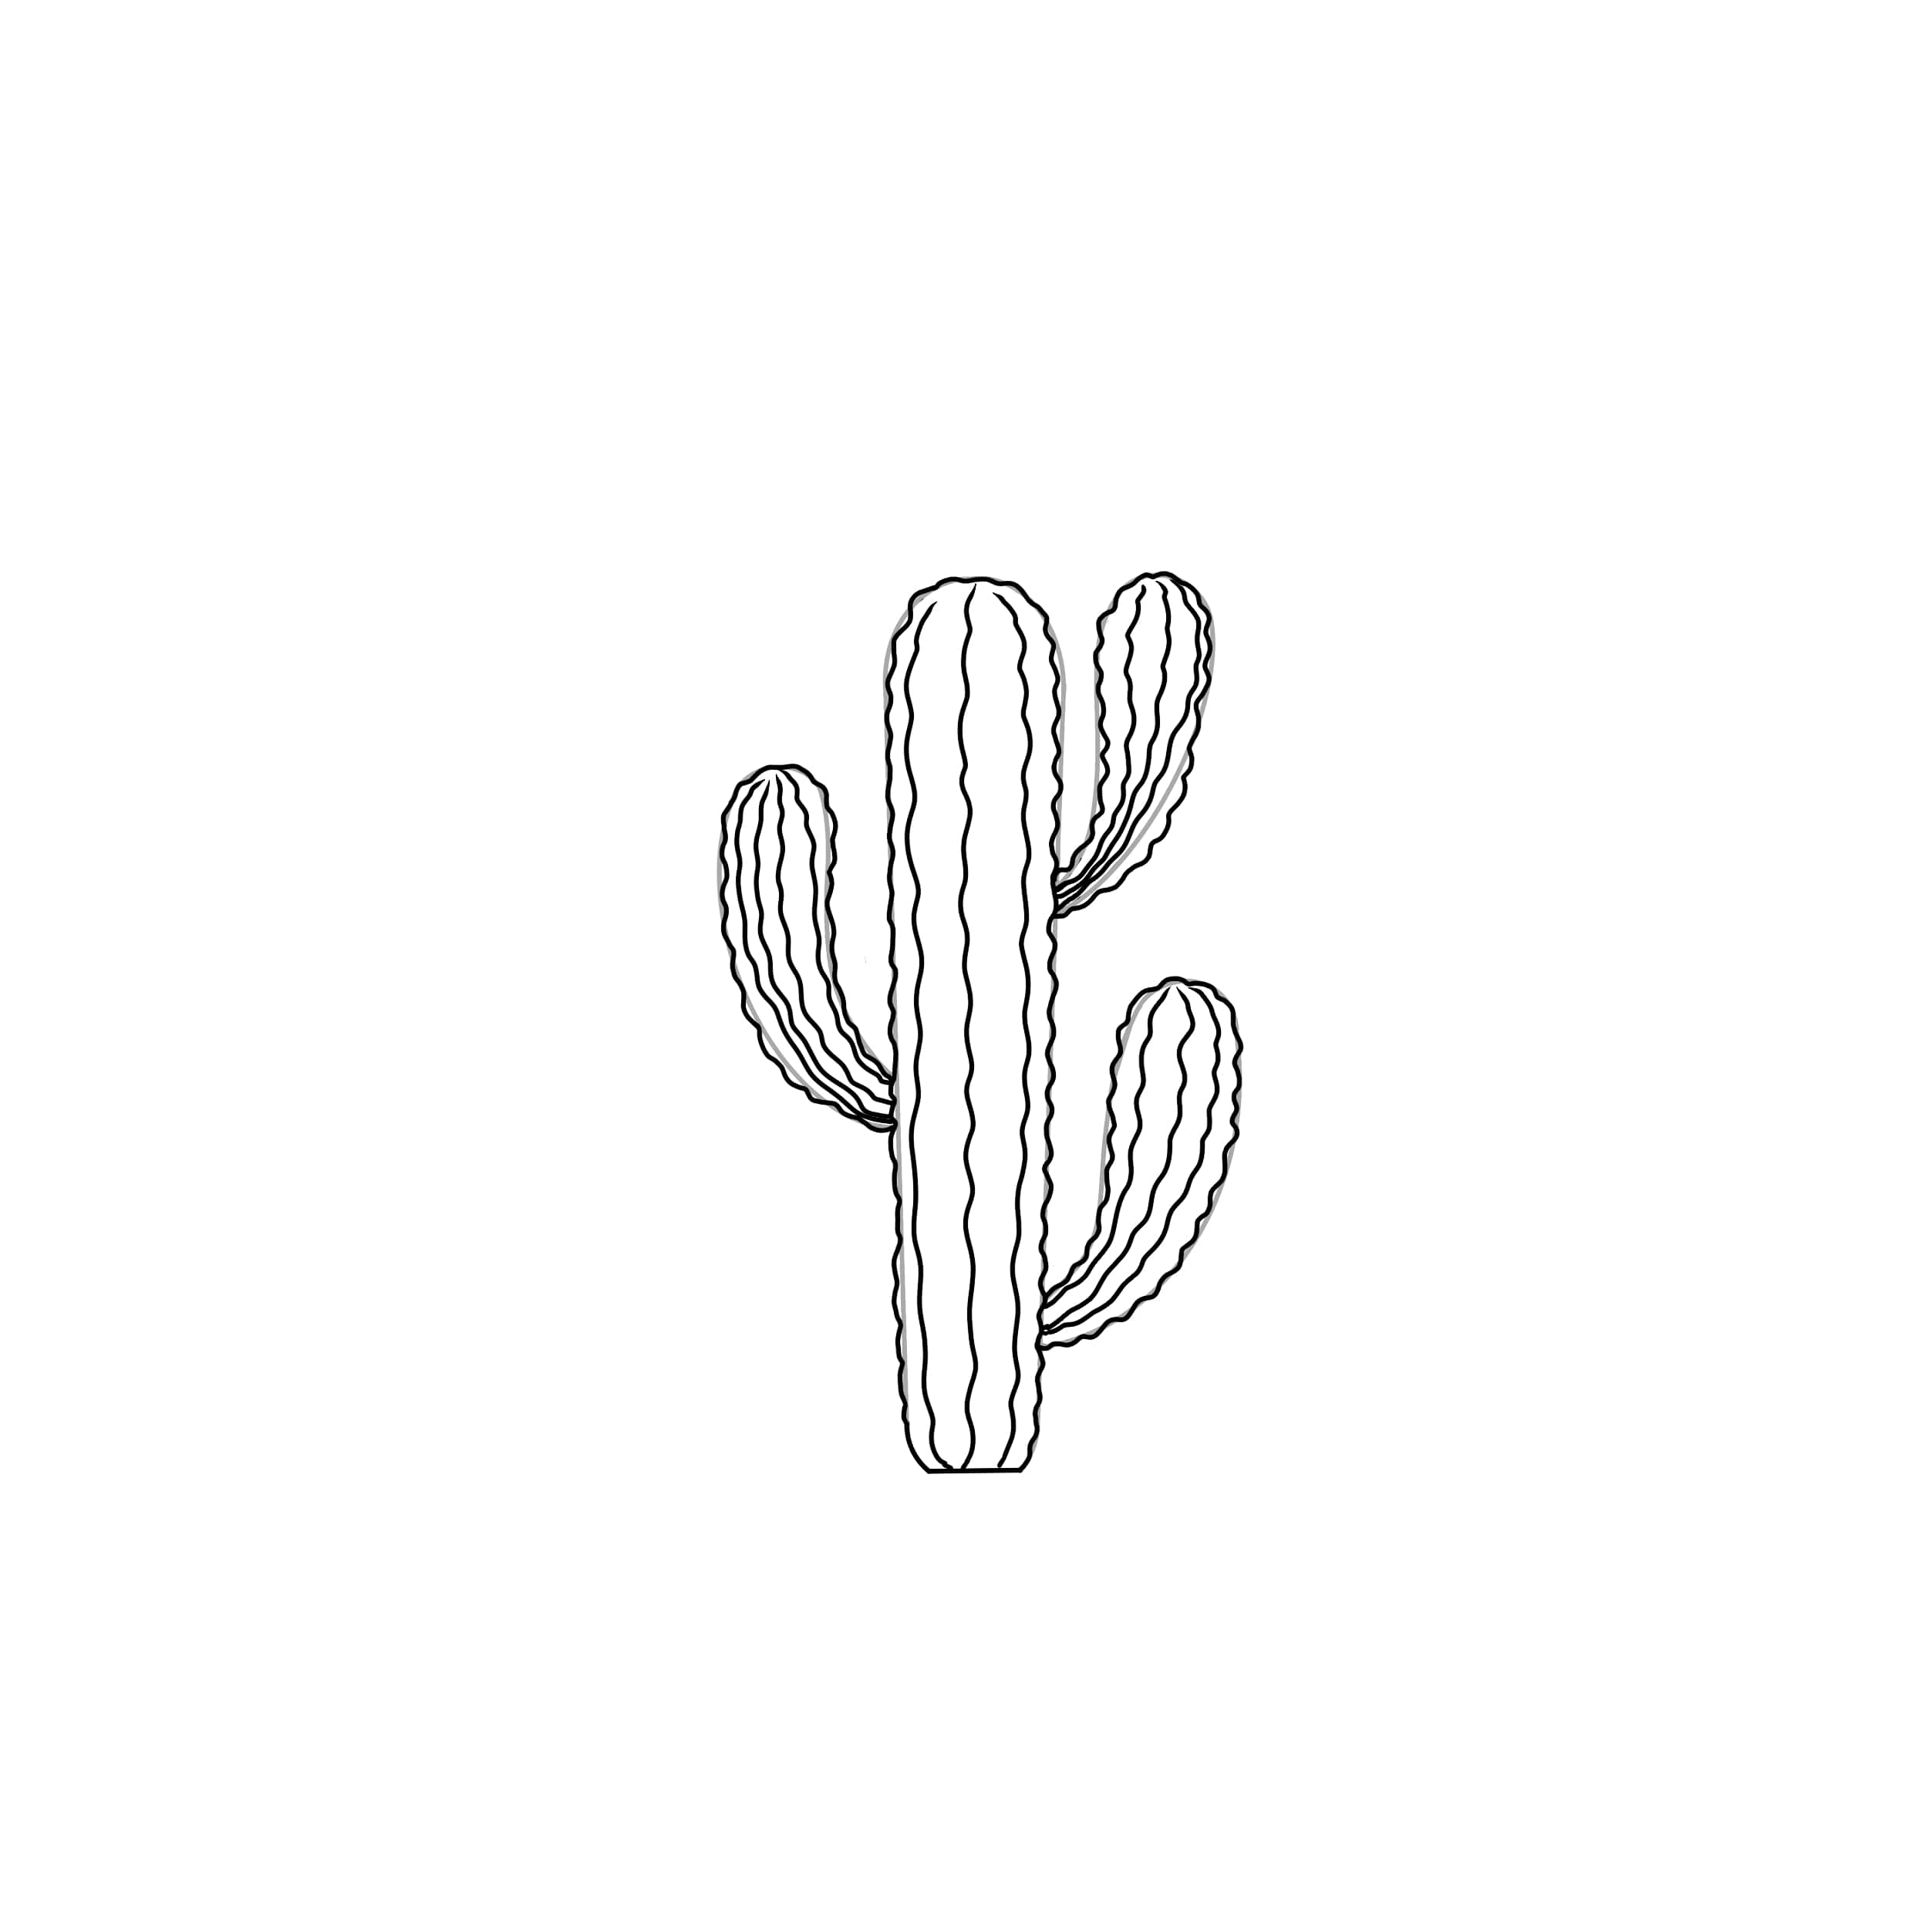 how to draw a cactus step 3 draw texture to cactus stem